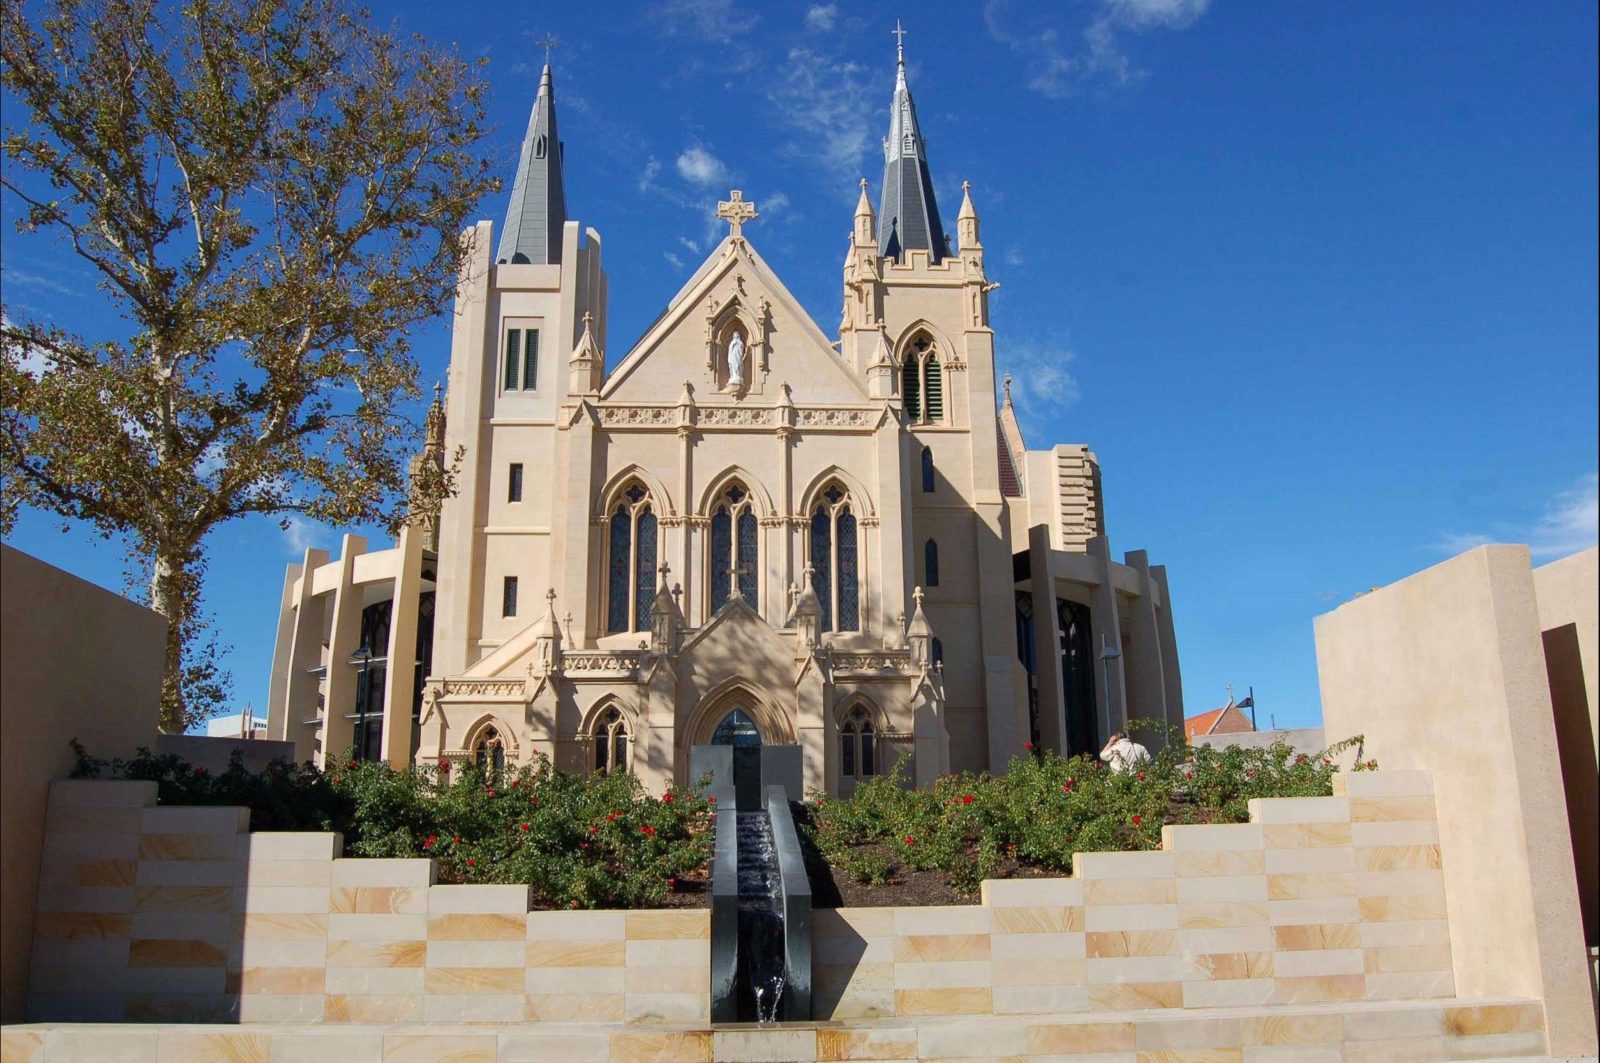 St Mary's Cathedral, Perth, Western Australia